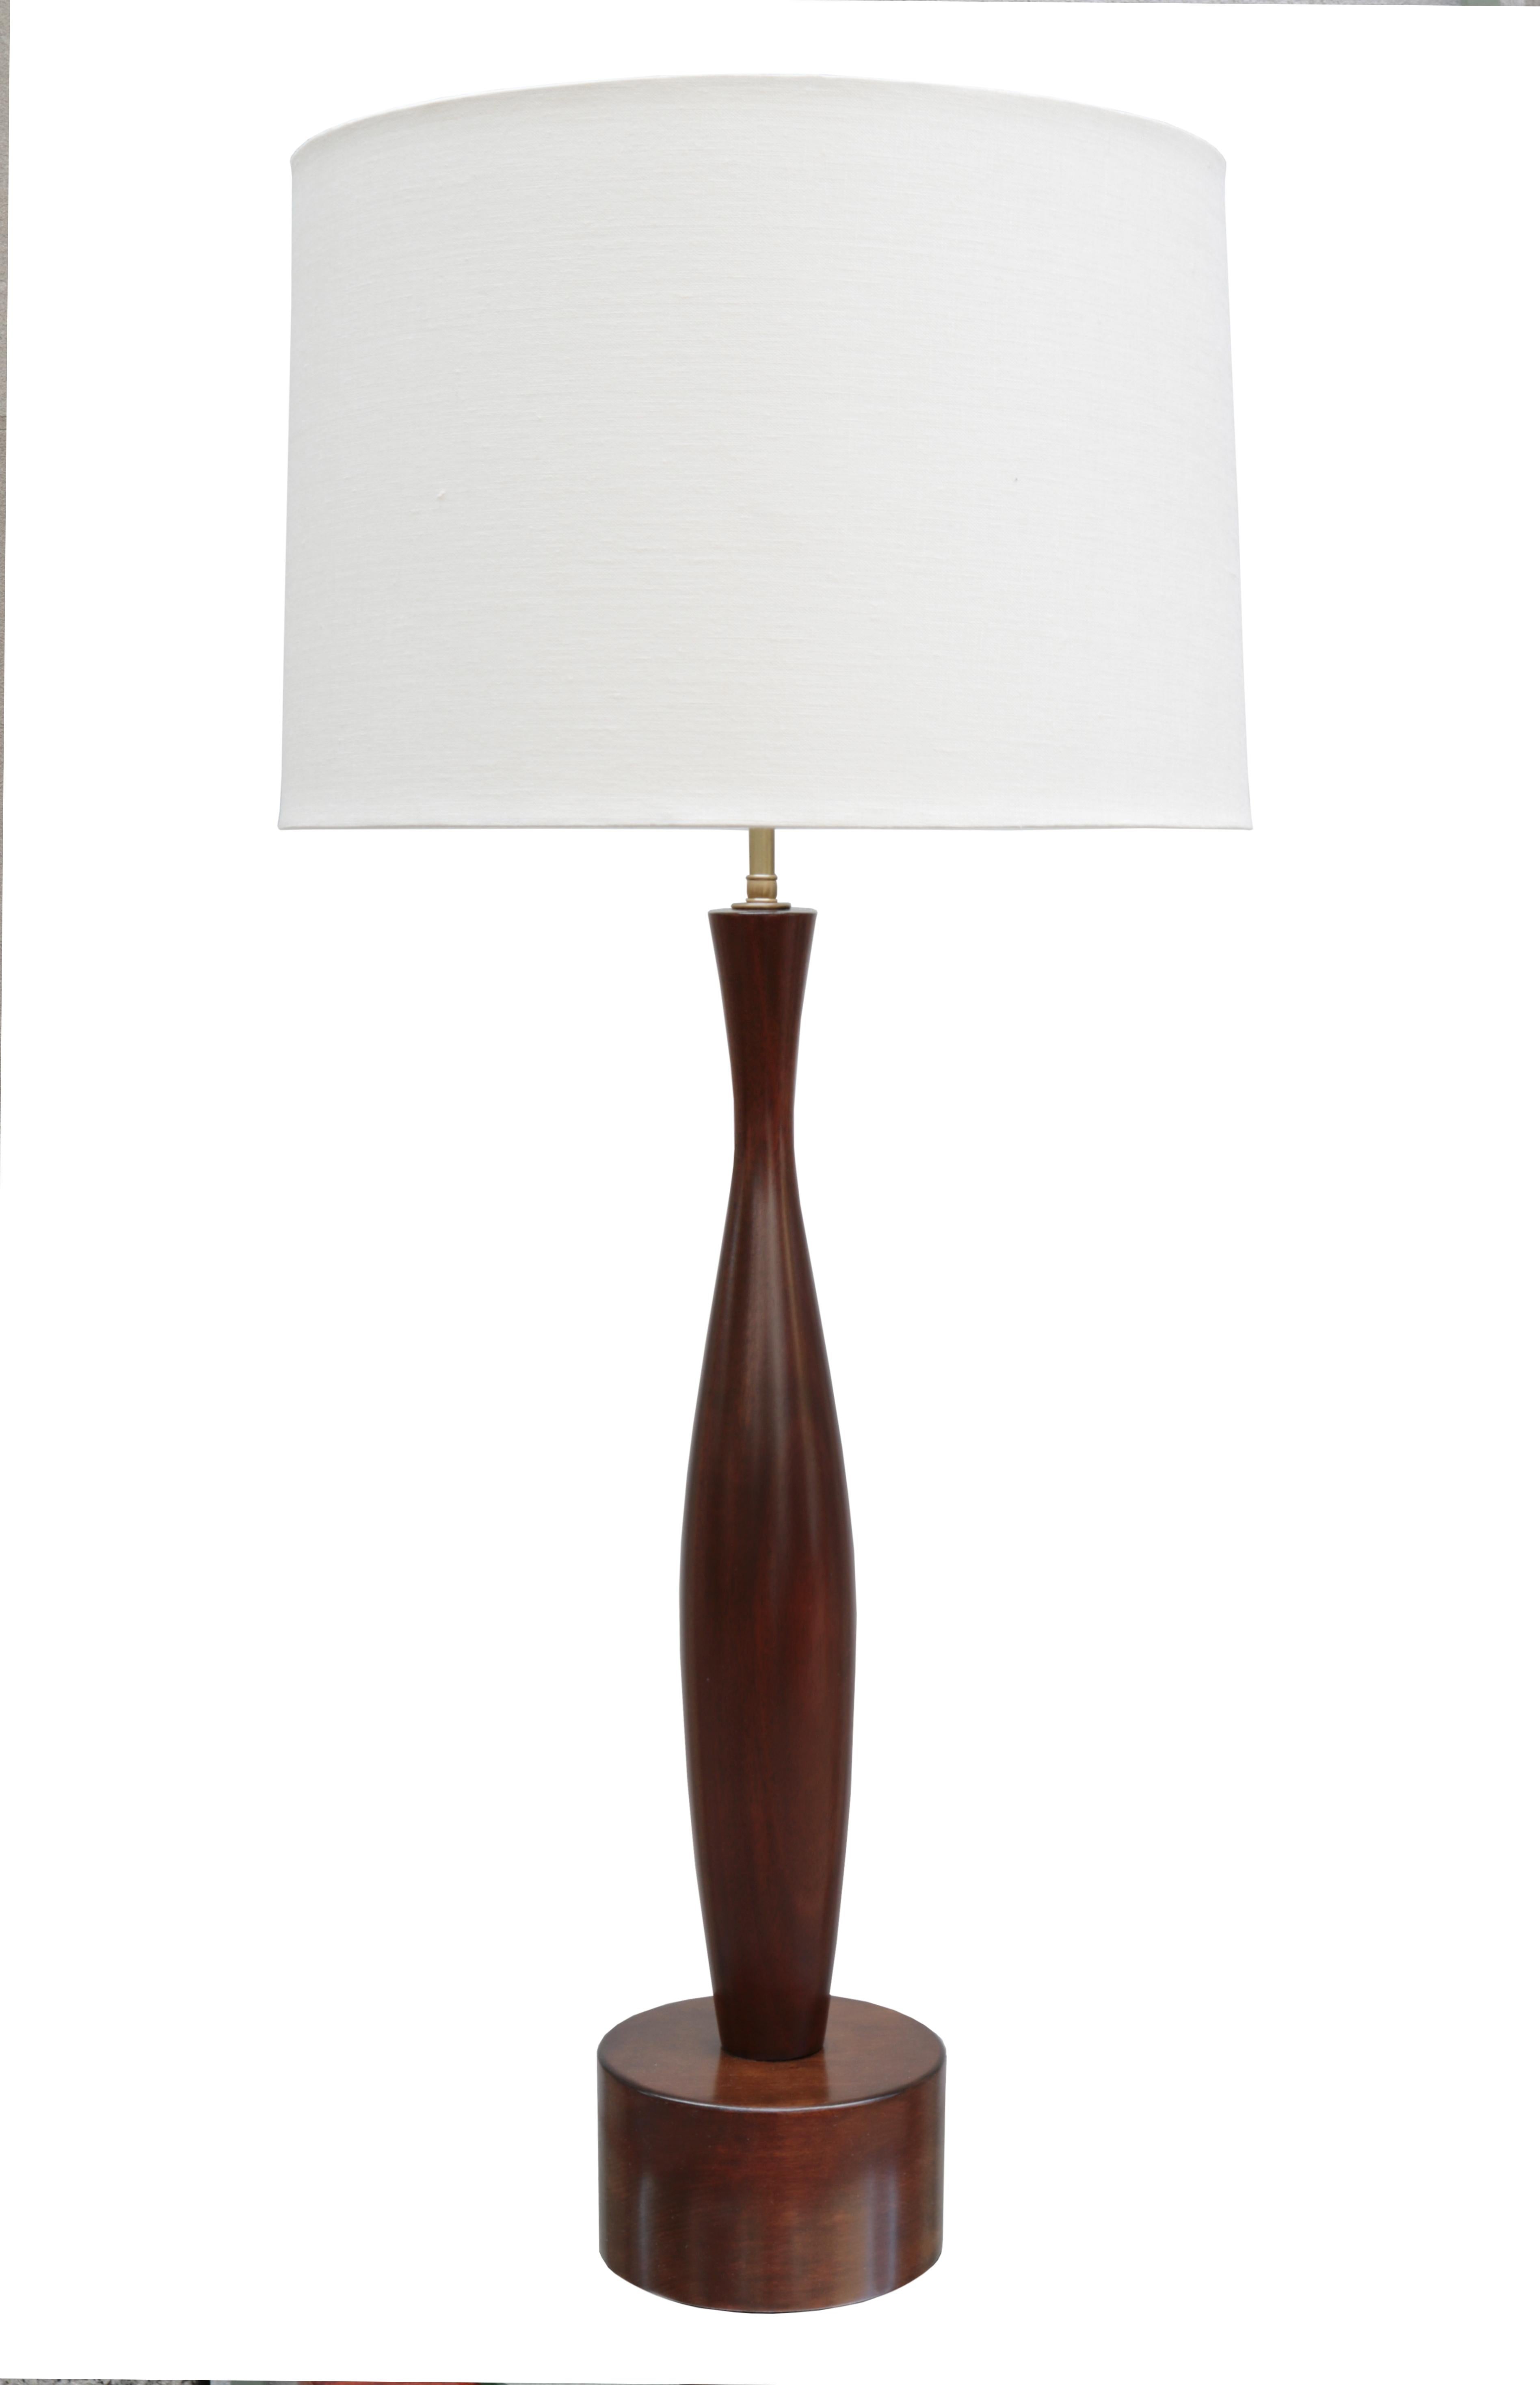 A pair of Mid-Century Modernist table lamps. 
Sculptural forms crafted in mahogany.